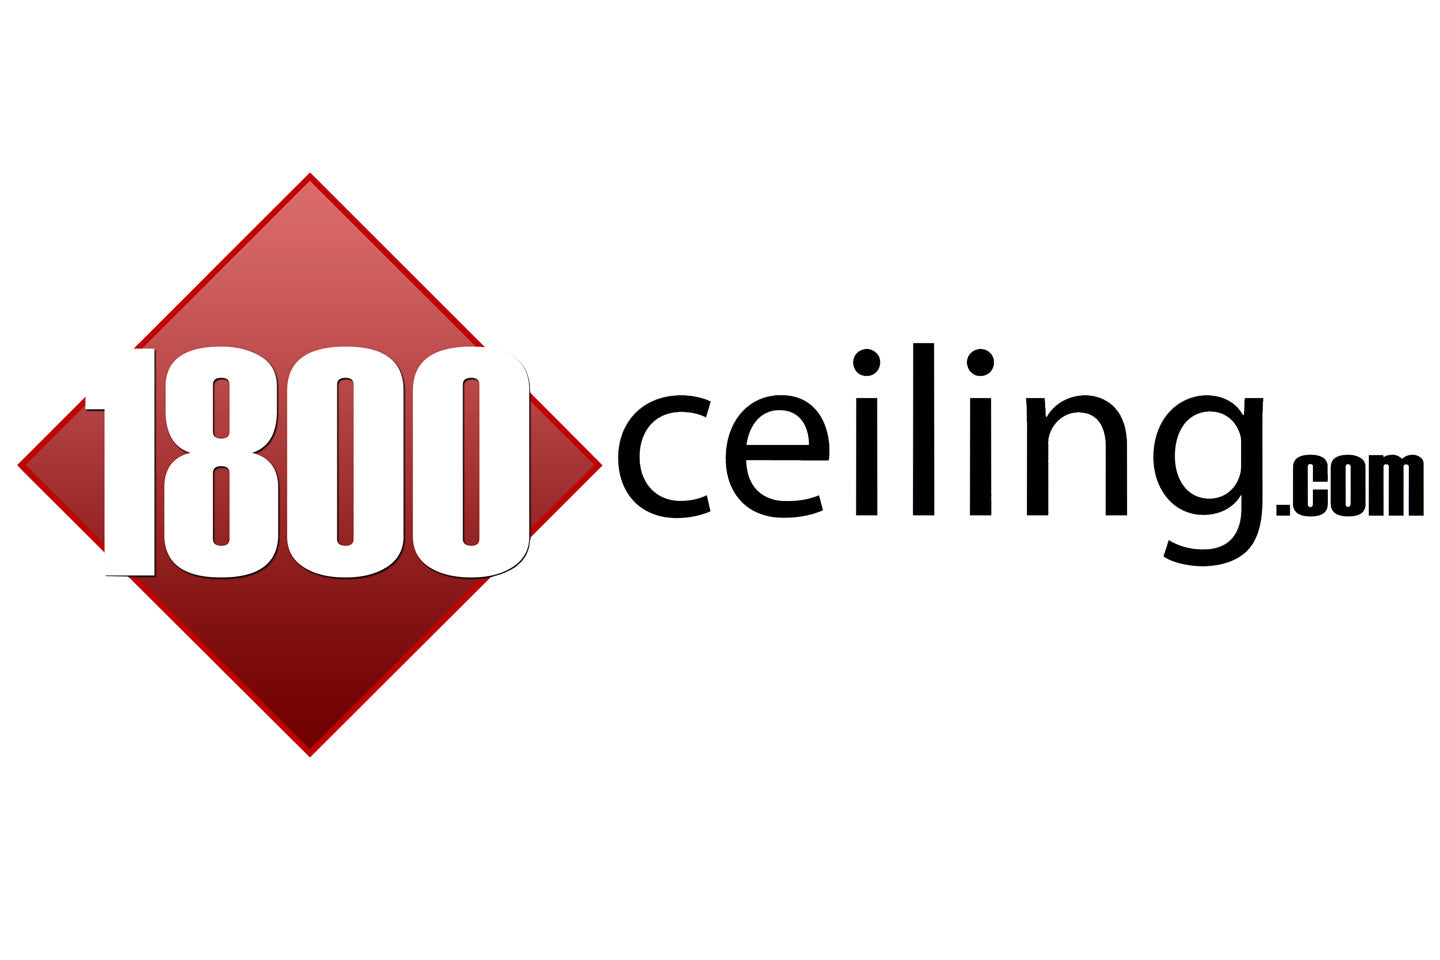 5% Off With 1800ceiling Promo Code